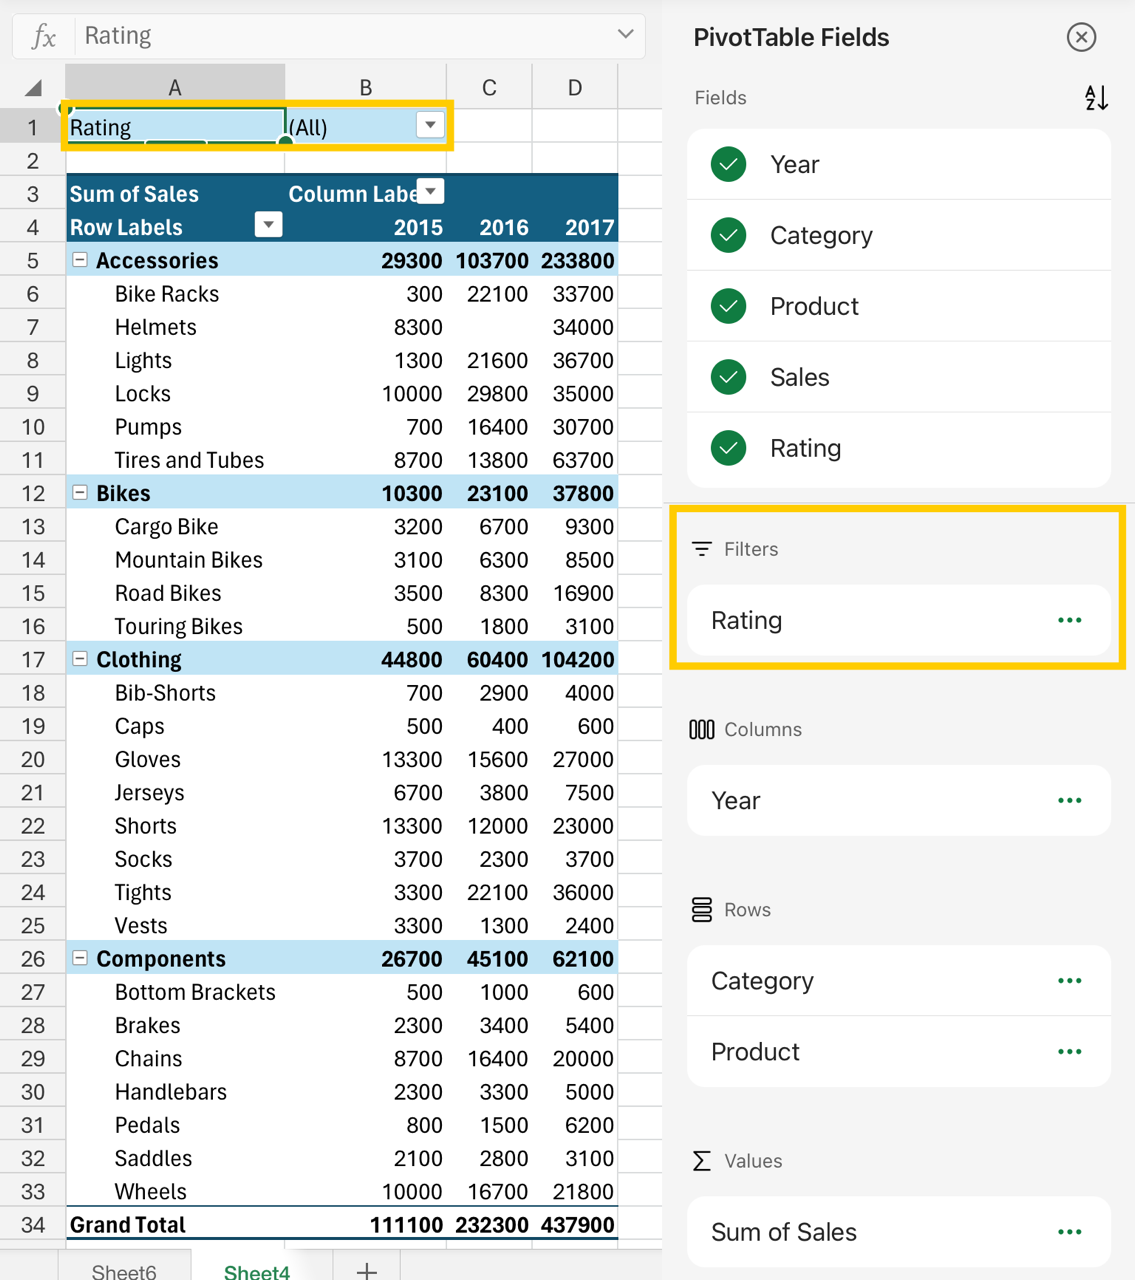 Image of the filter area in the field list and pivottable.